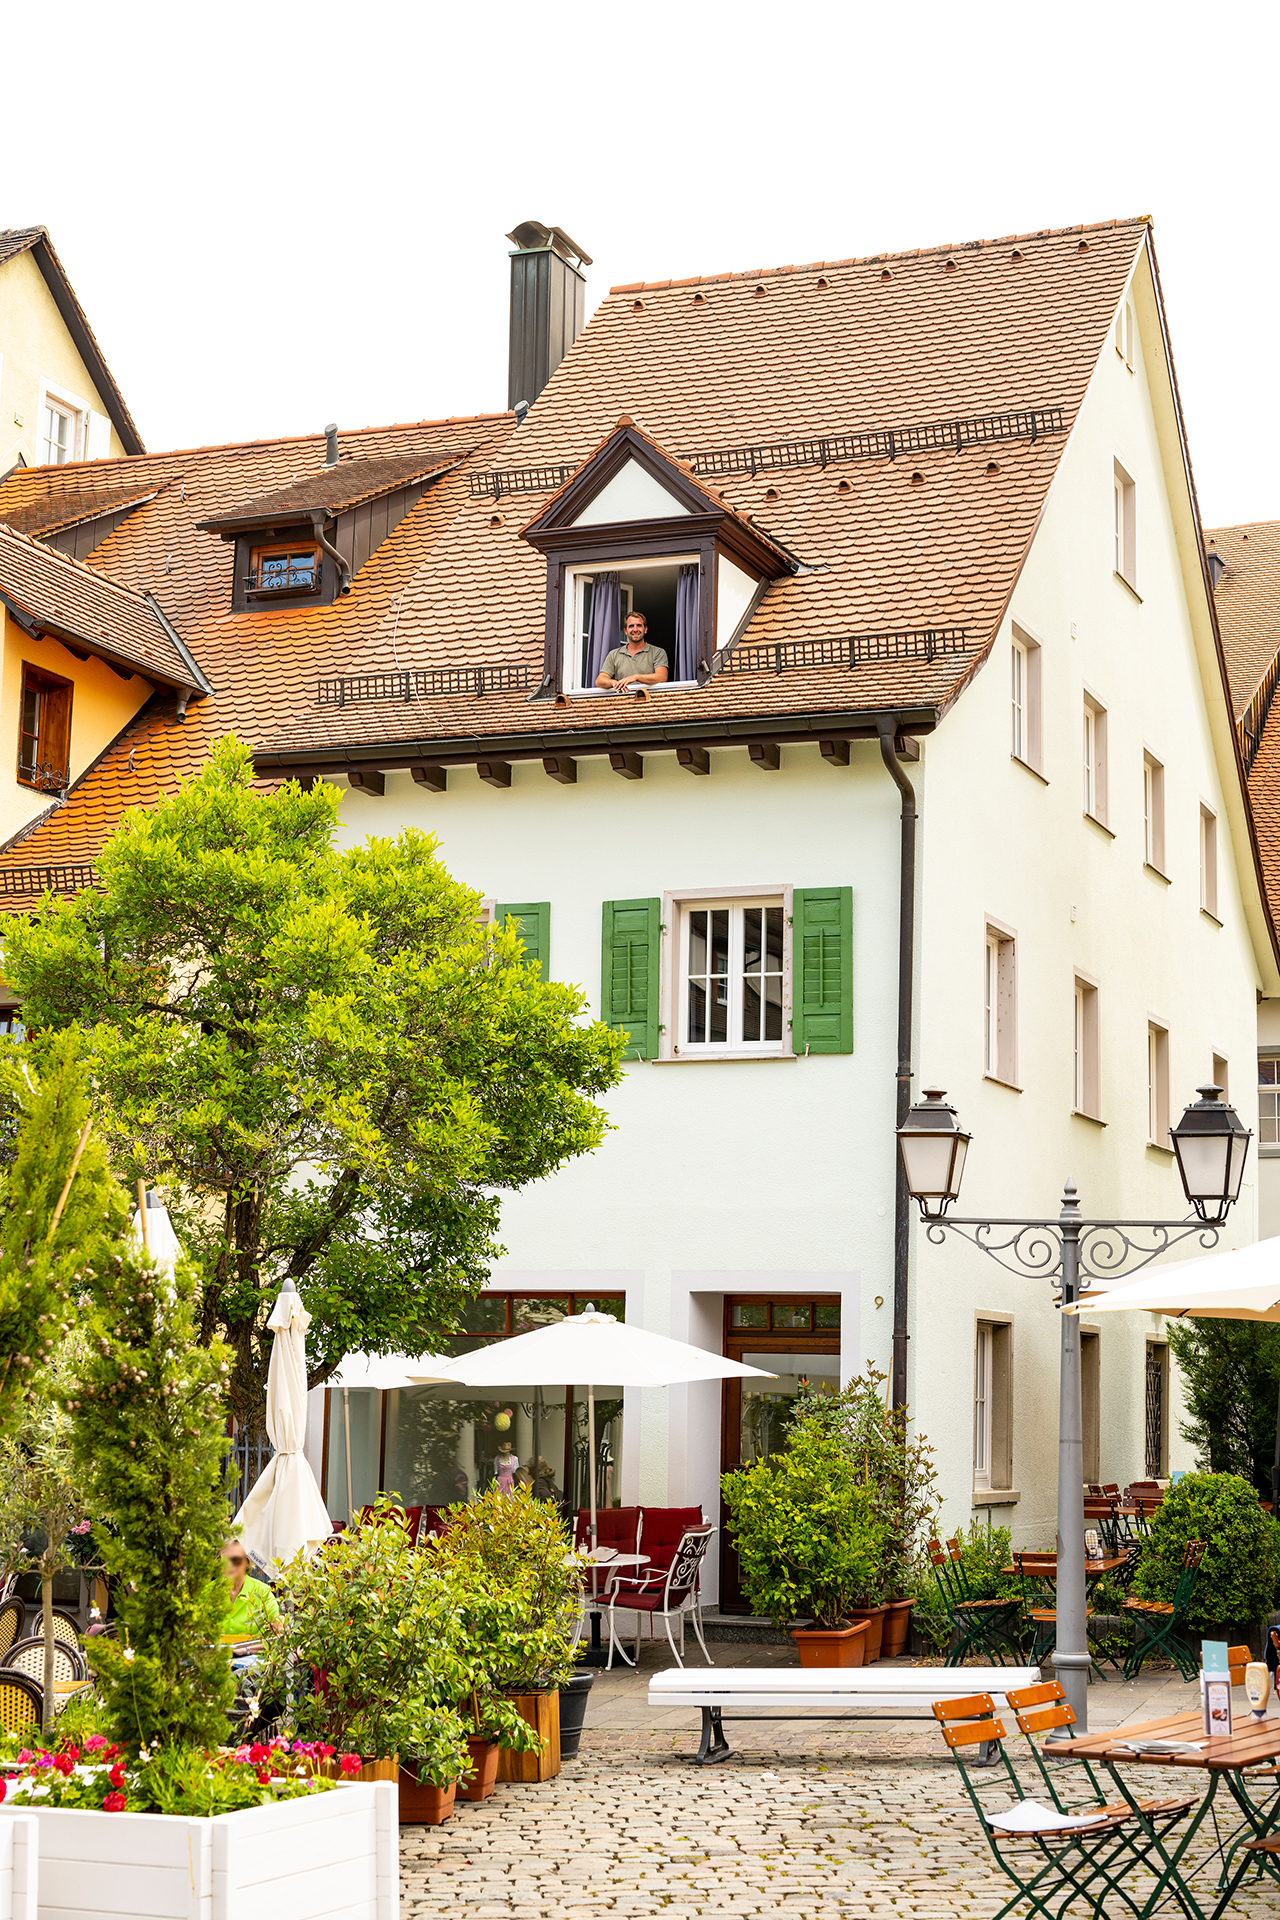 Holiday apartments on Lake Constance: Guest House "Am Schlossplatz", Room #2 - Exterior